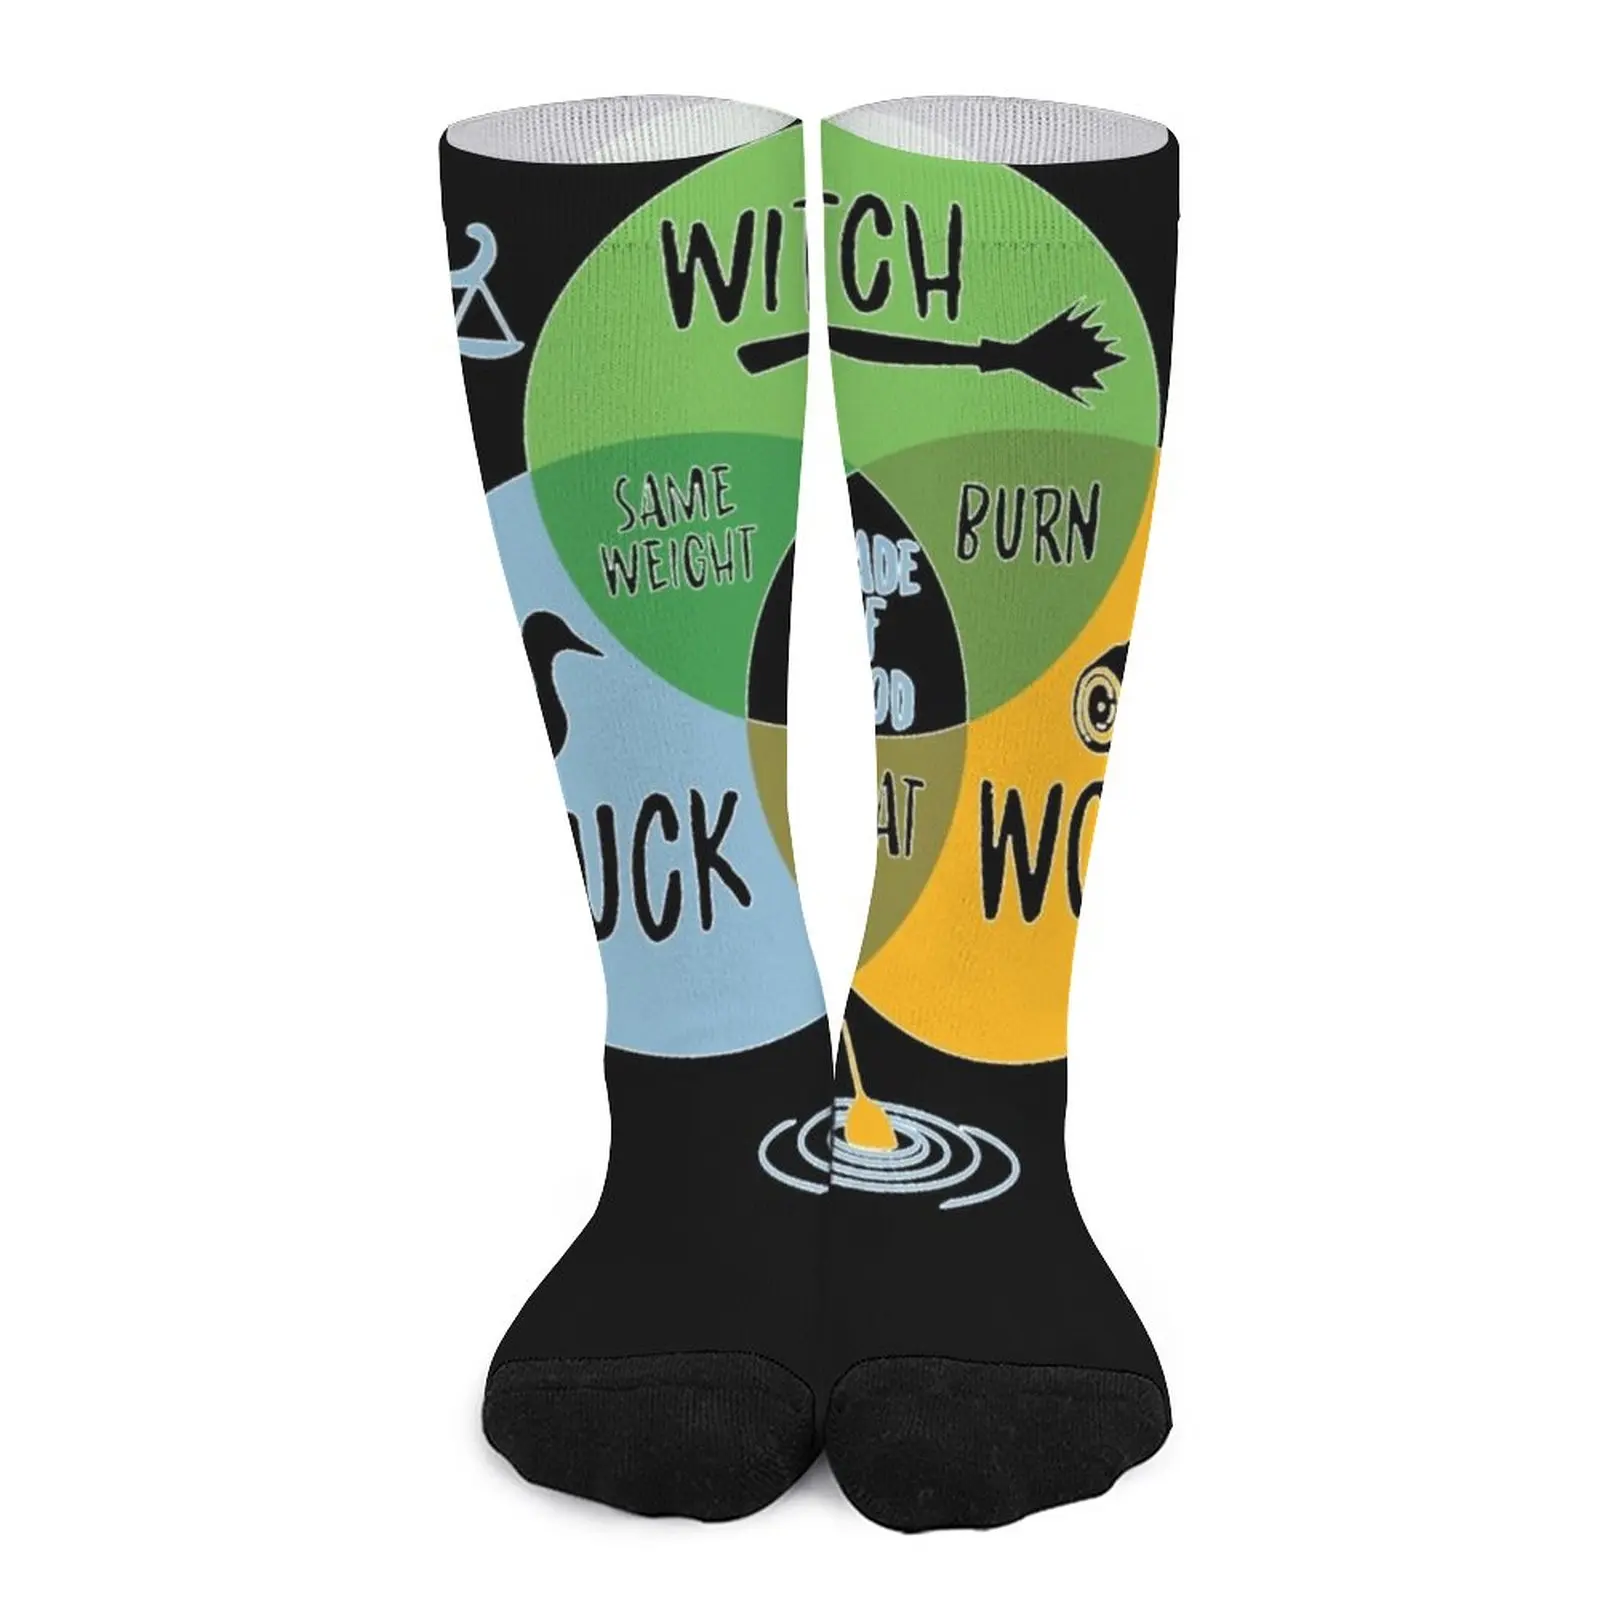 Monty Python Witch Duck Wood Socks Men gift stockings for men Children's socks Soccer wood handle jump ropes for fitness exercise outdoor games for children juguetes divertidos para niños de 10 12 15 18 años